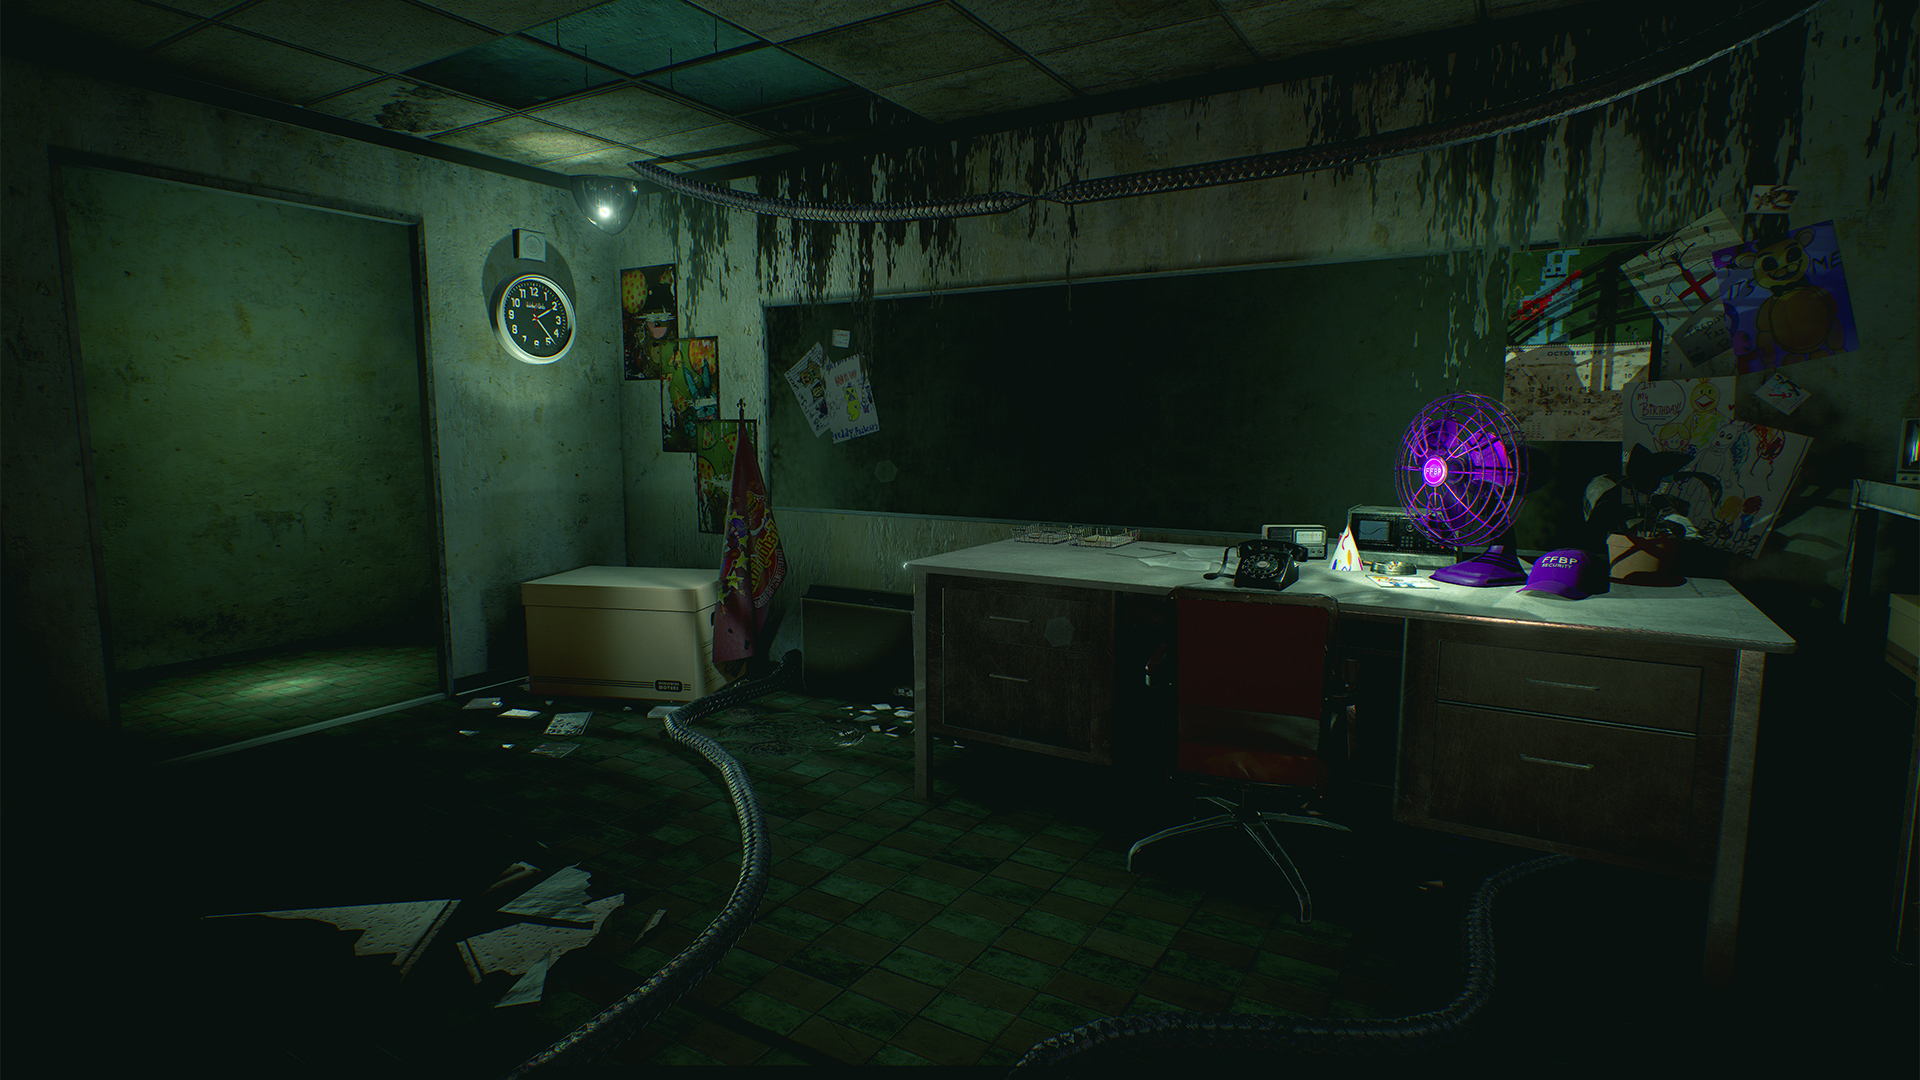 Unreal 4 Makes Five Nights At Freddy’s Actually Look Good